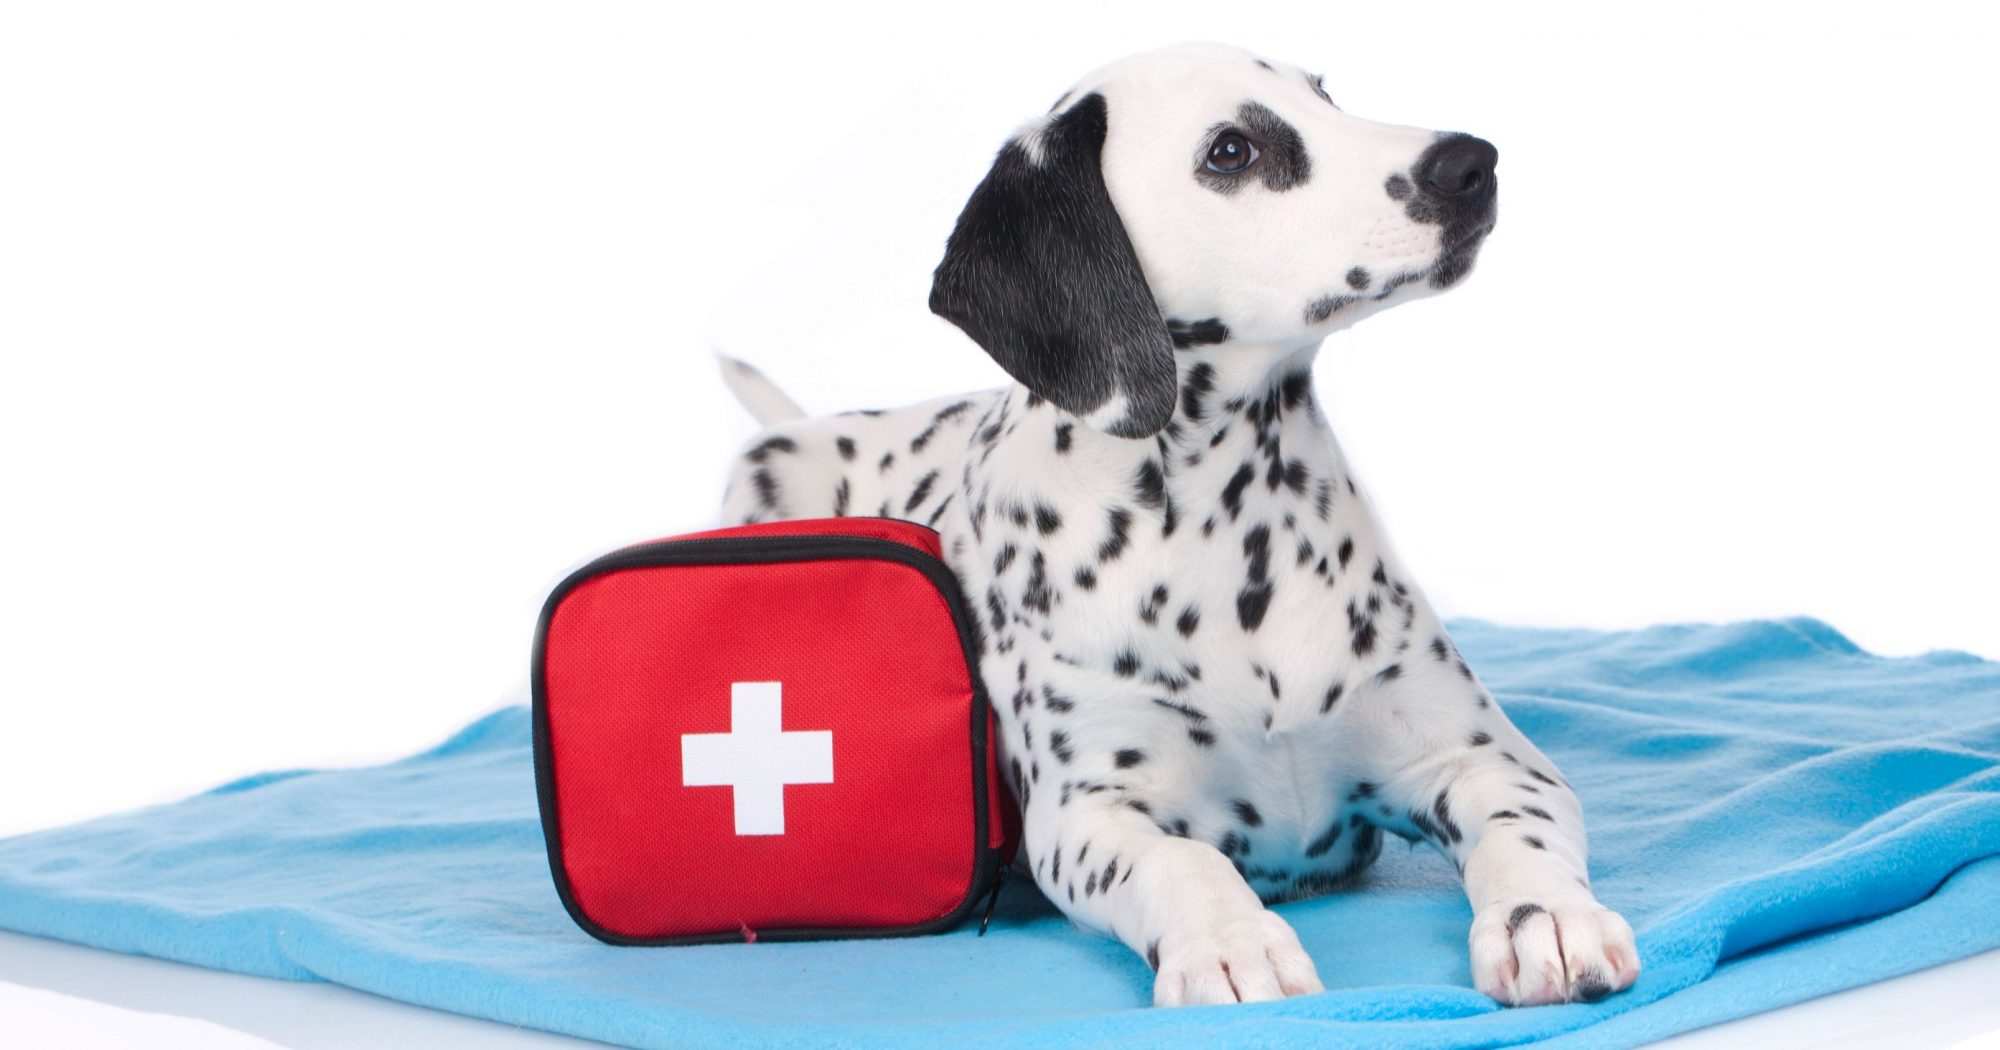 Dalmatian puppy with first aid kit.